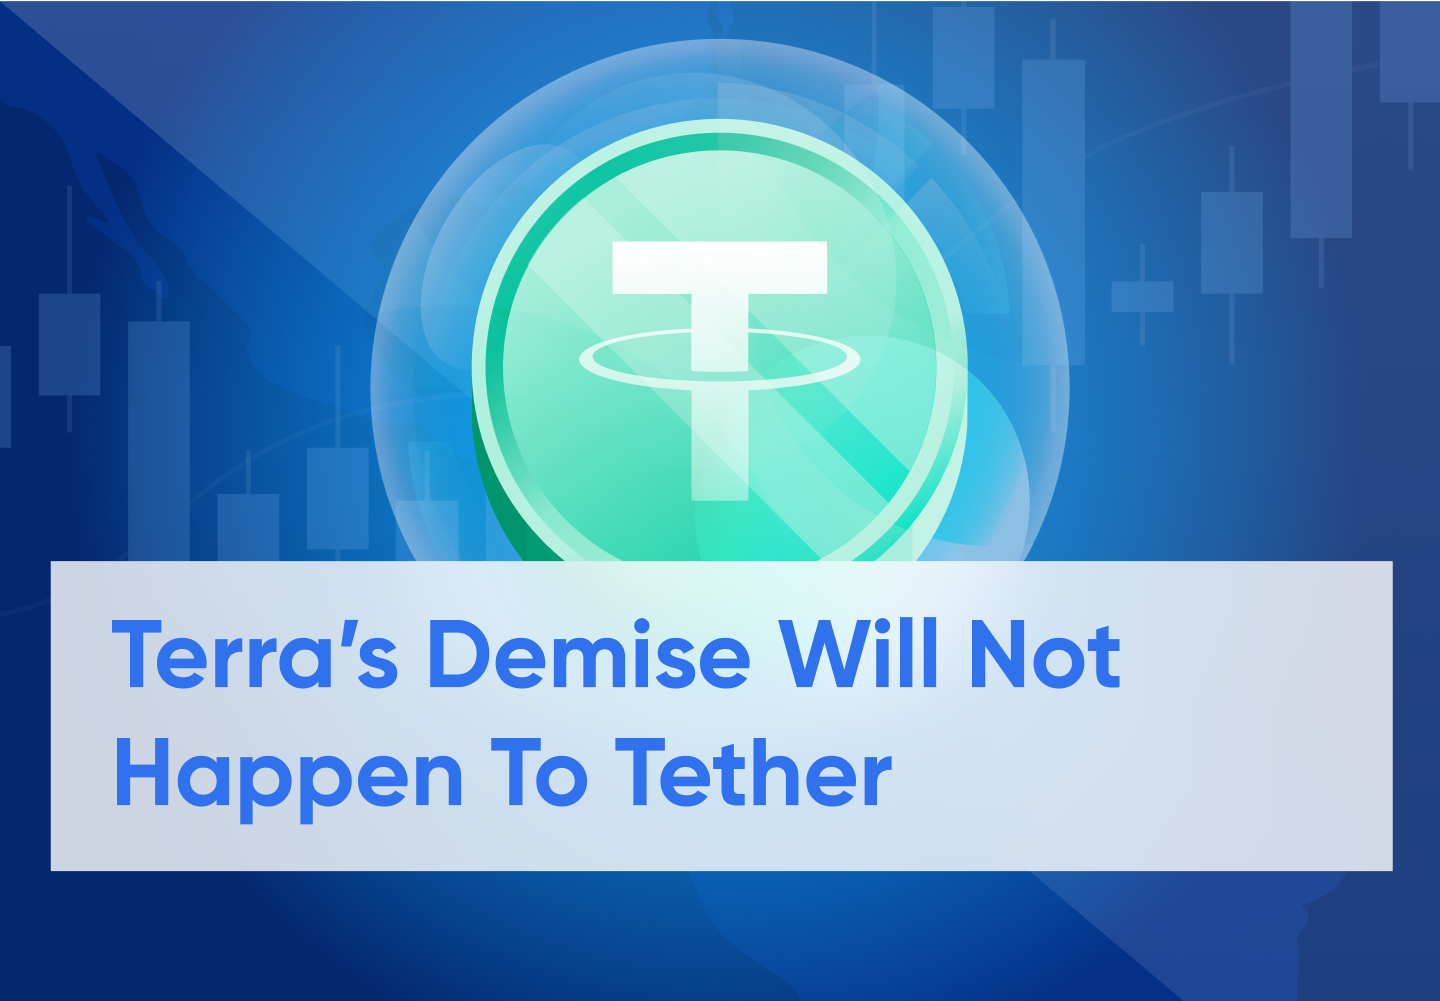 Why Tether is Not the Same as Terra